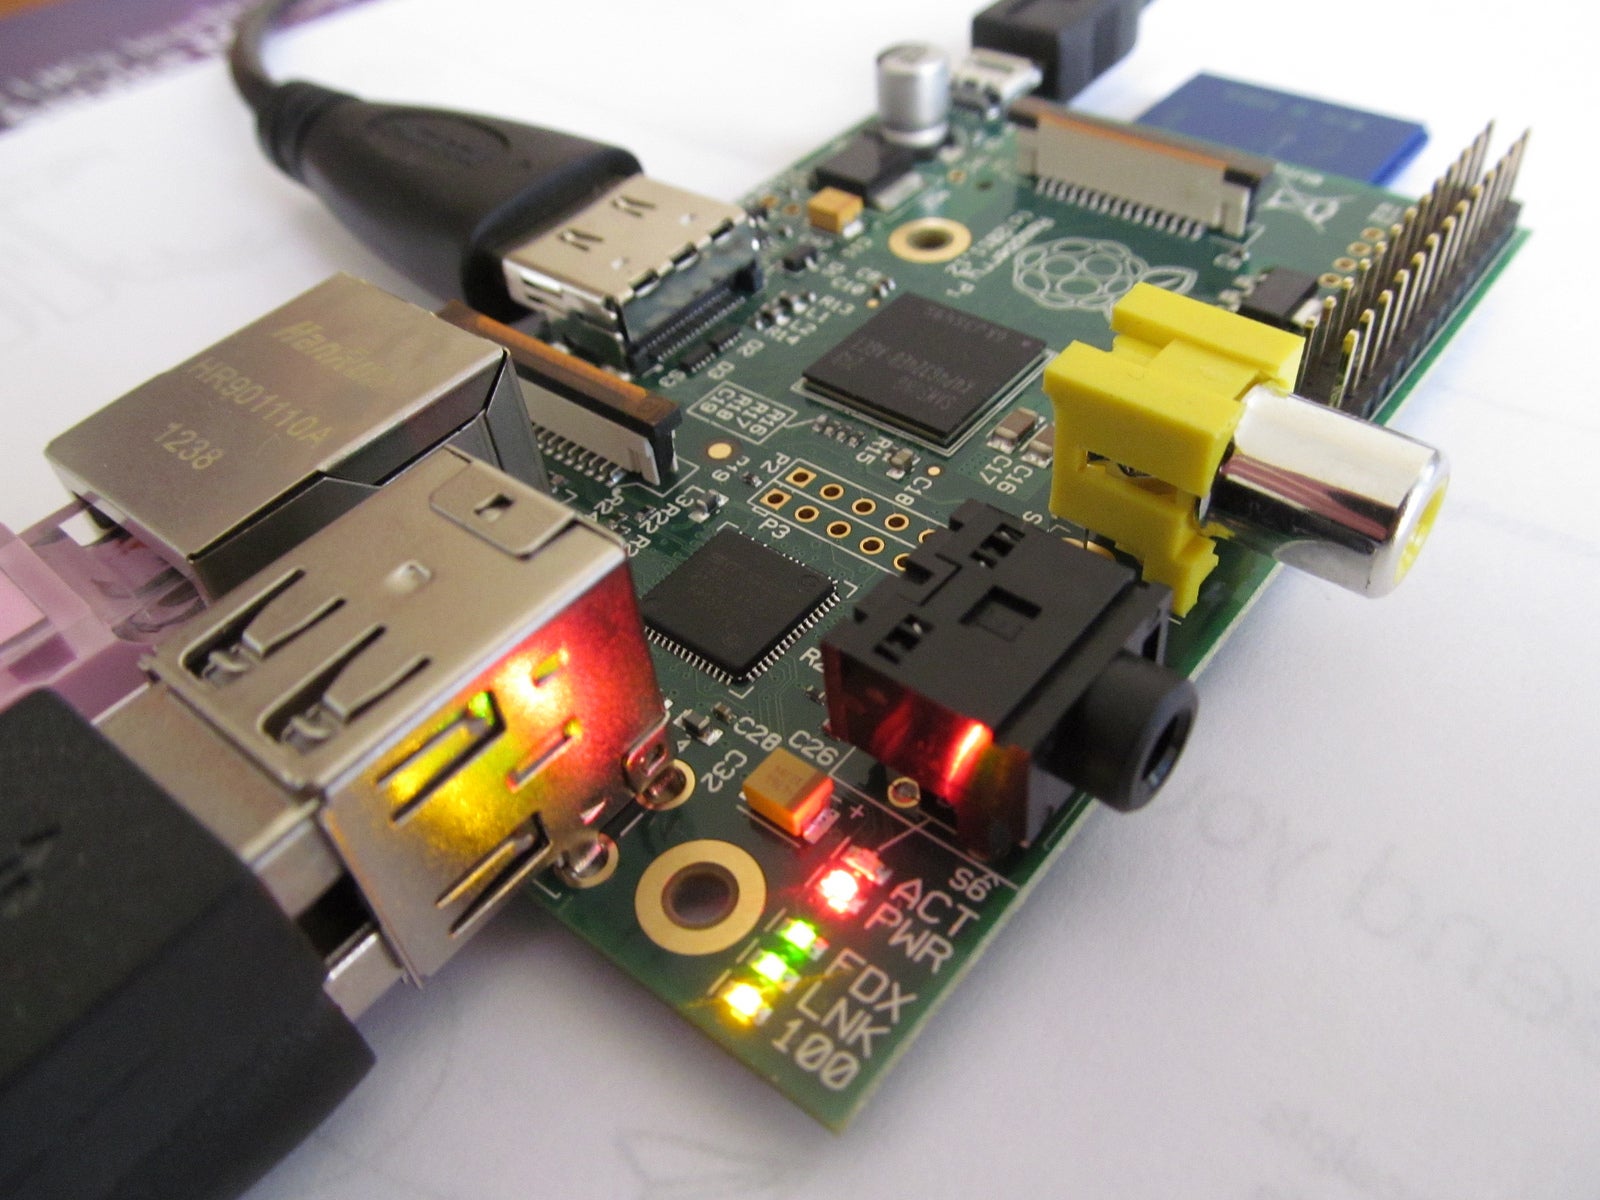 The Raspberry Pi was one of the many UK projects selected for inclusion by the Nominet Trust.